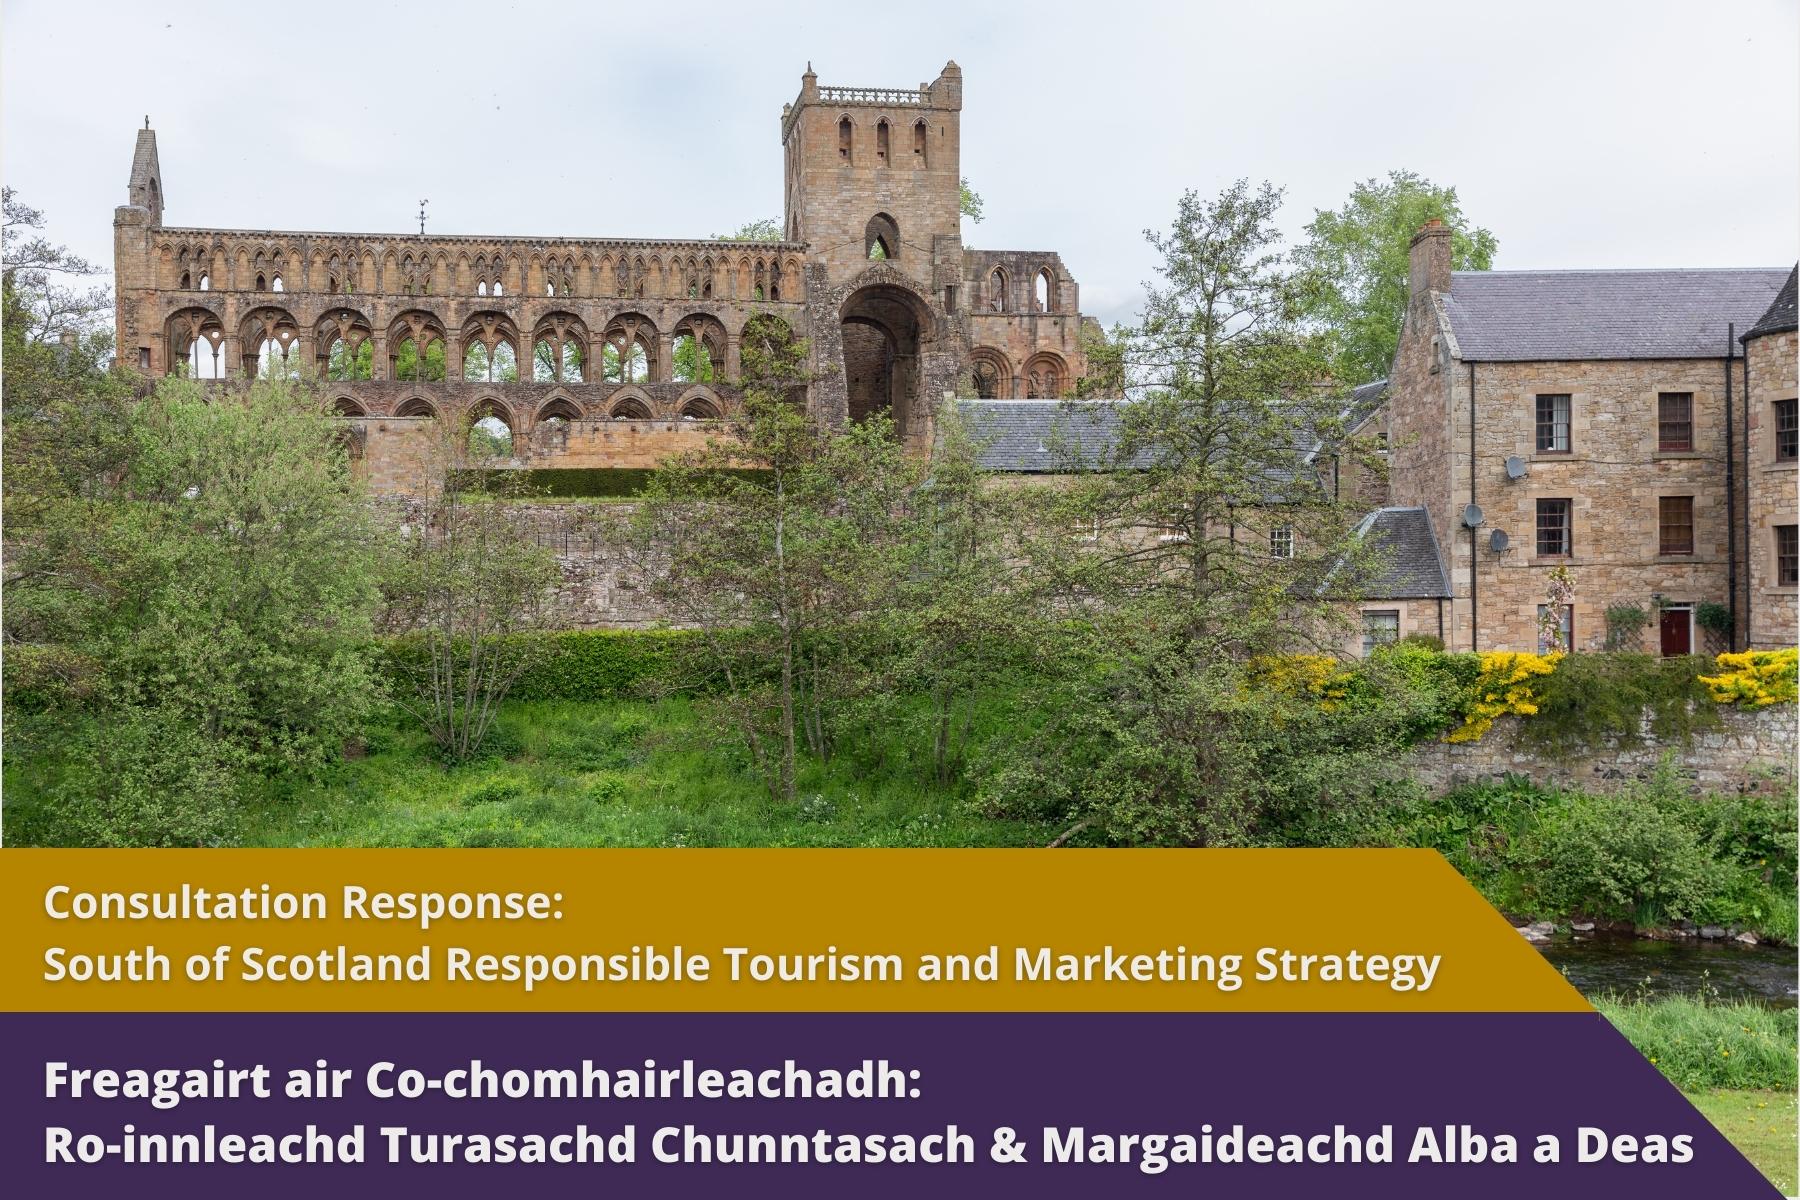 Picture: An old, grand and derelict church without a roof or windows surrounded trees in leaf and grass, all next to old style buildings which appear to still be in use with text over picture. Text reads 'Consultation Response: South of Scotland Responsible Tourism and Marketing Strategy'